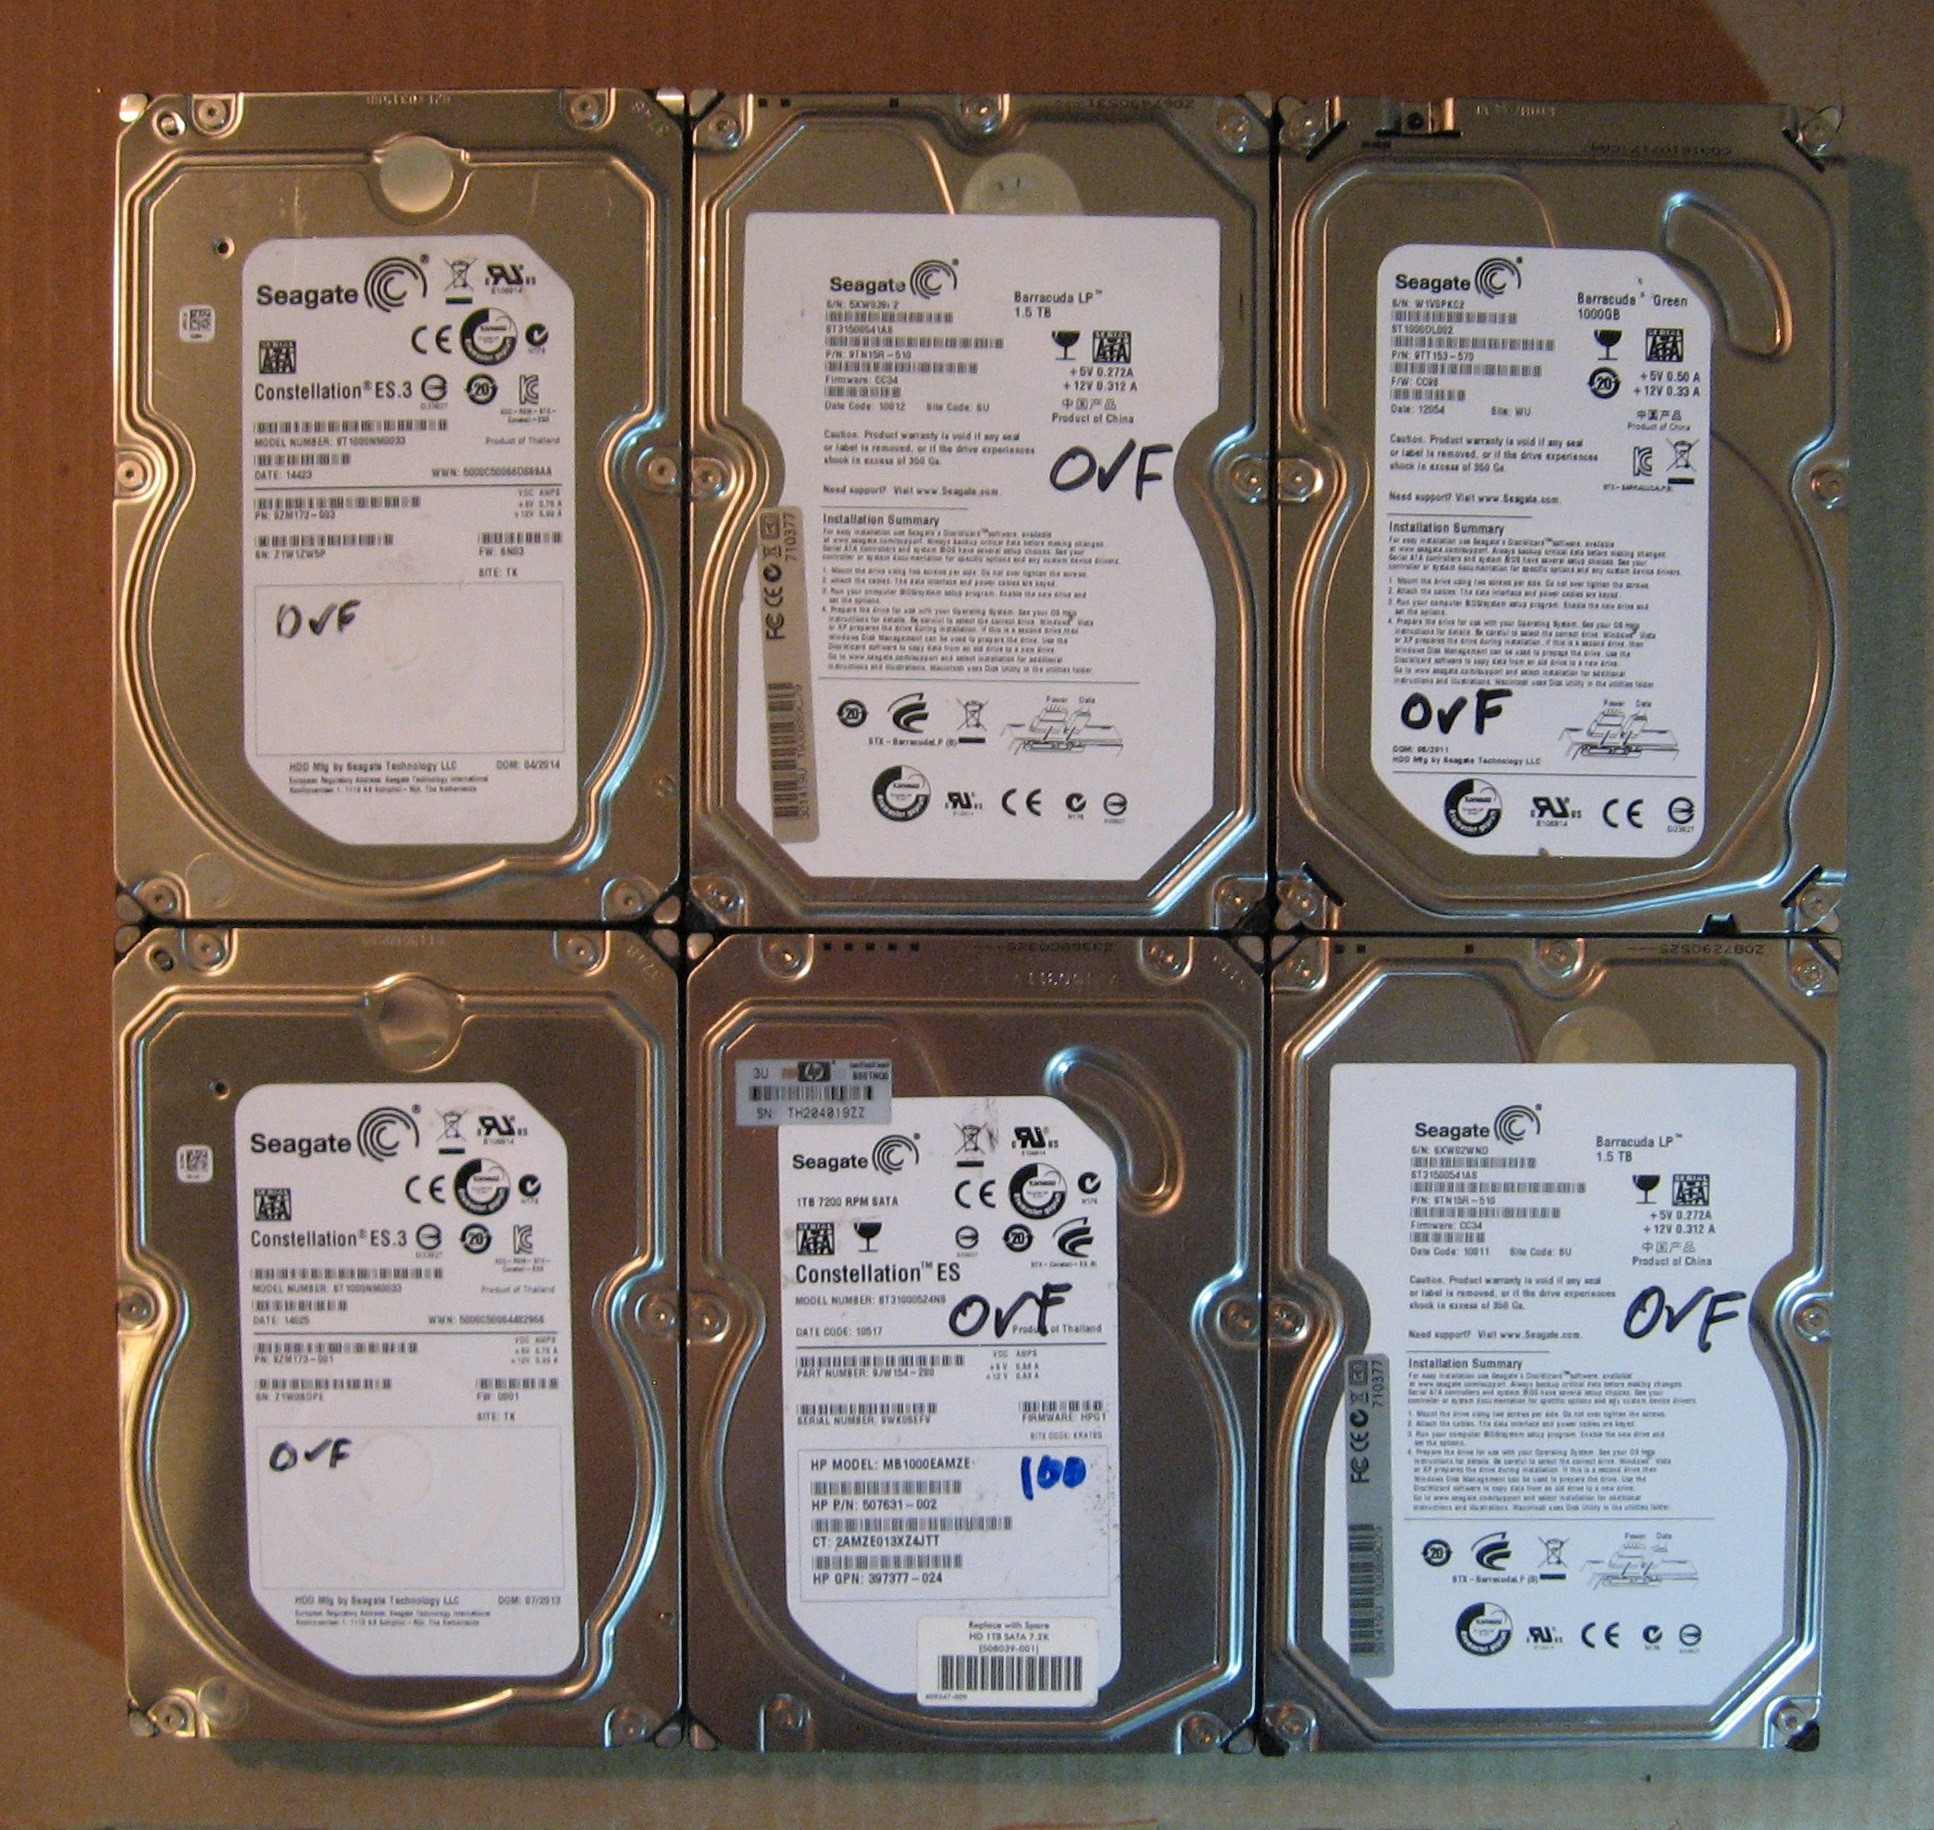 1TB HDD Lot of 6 Seagate 0176